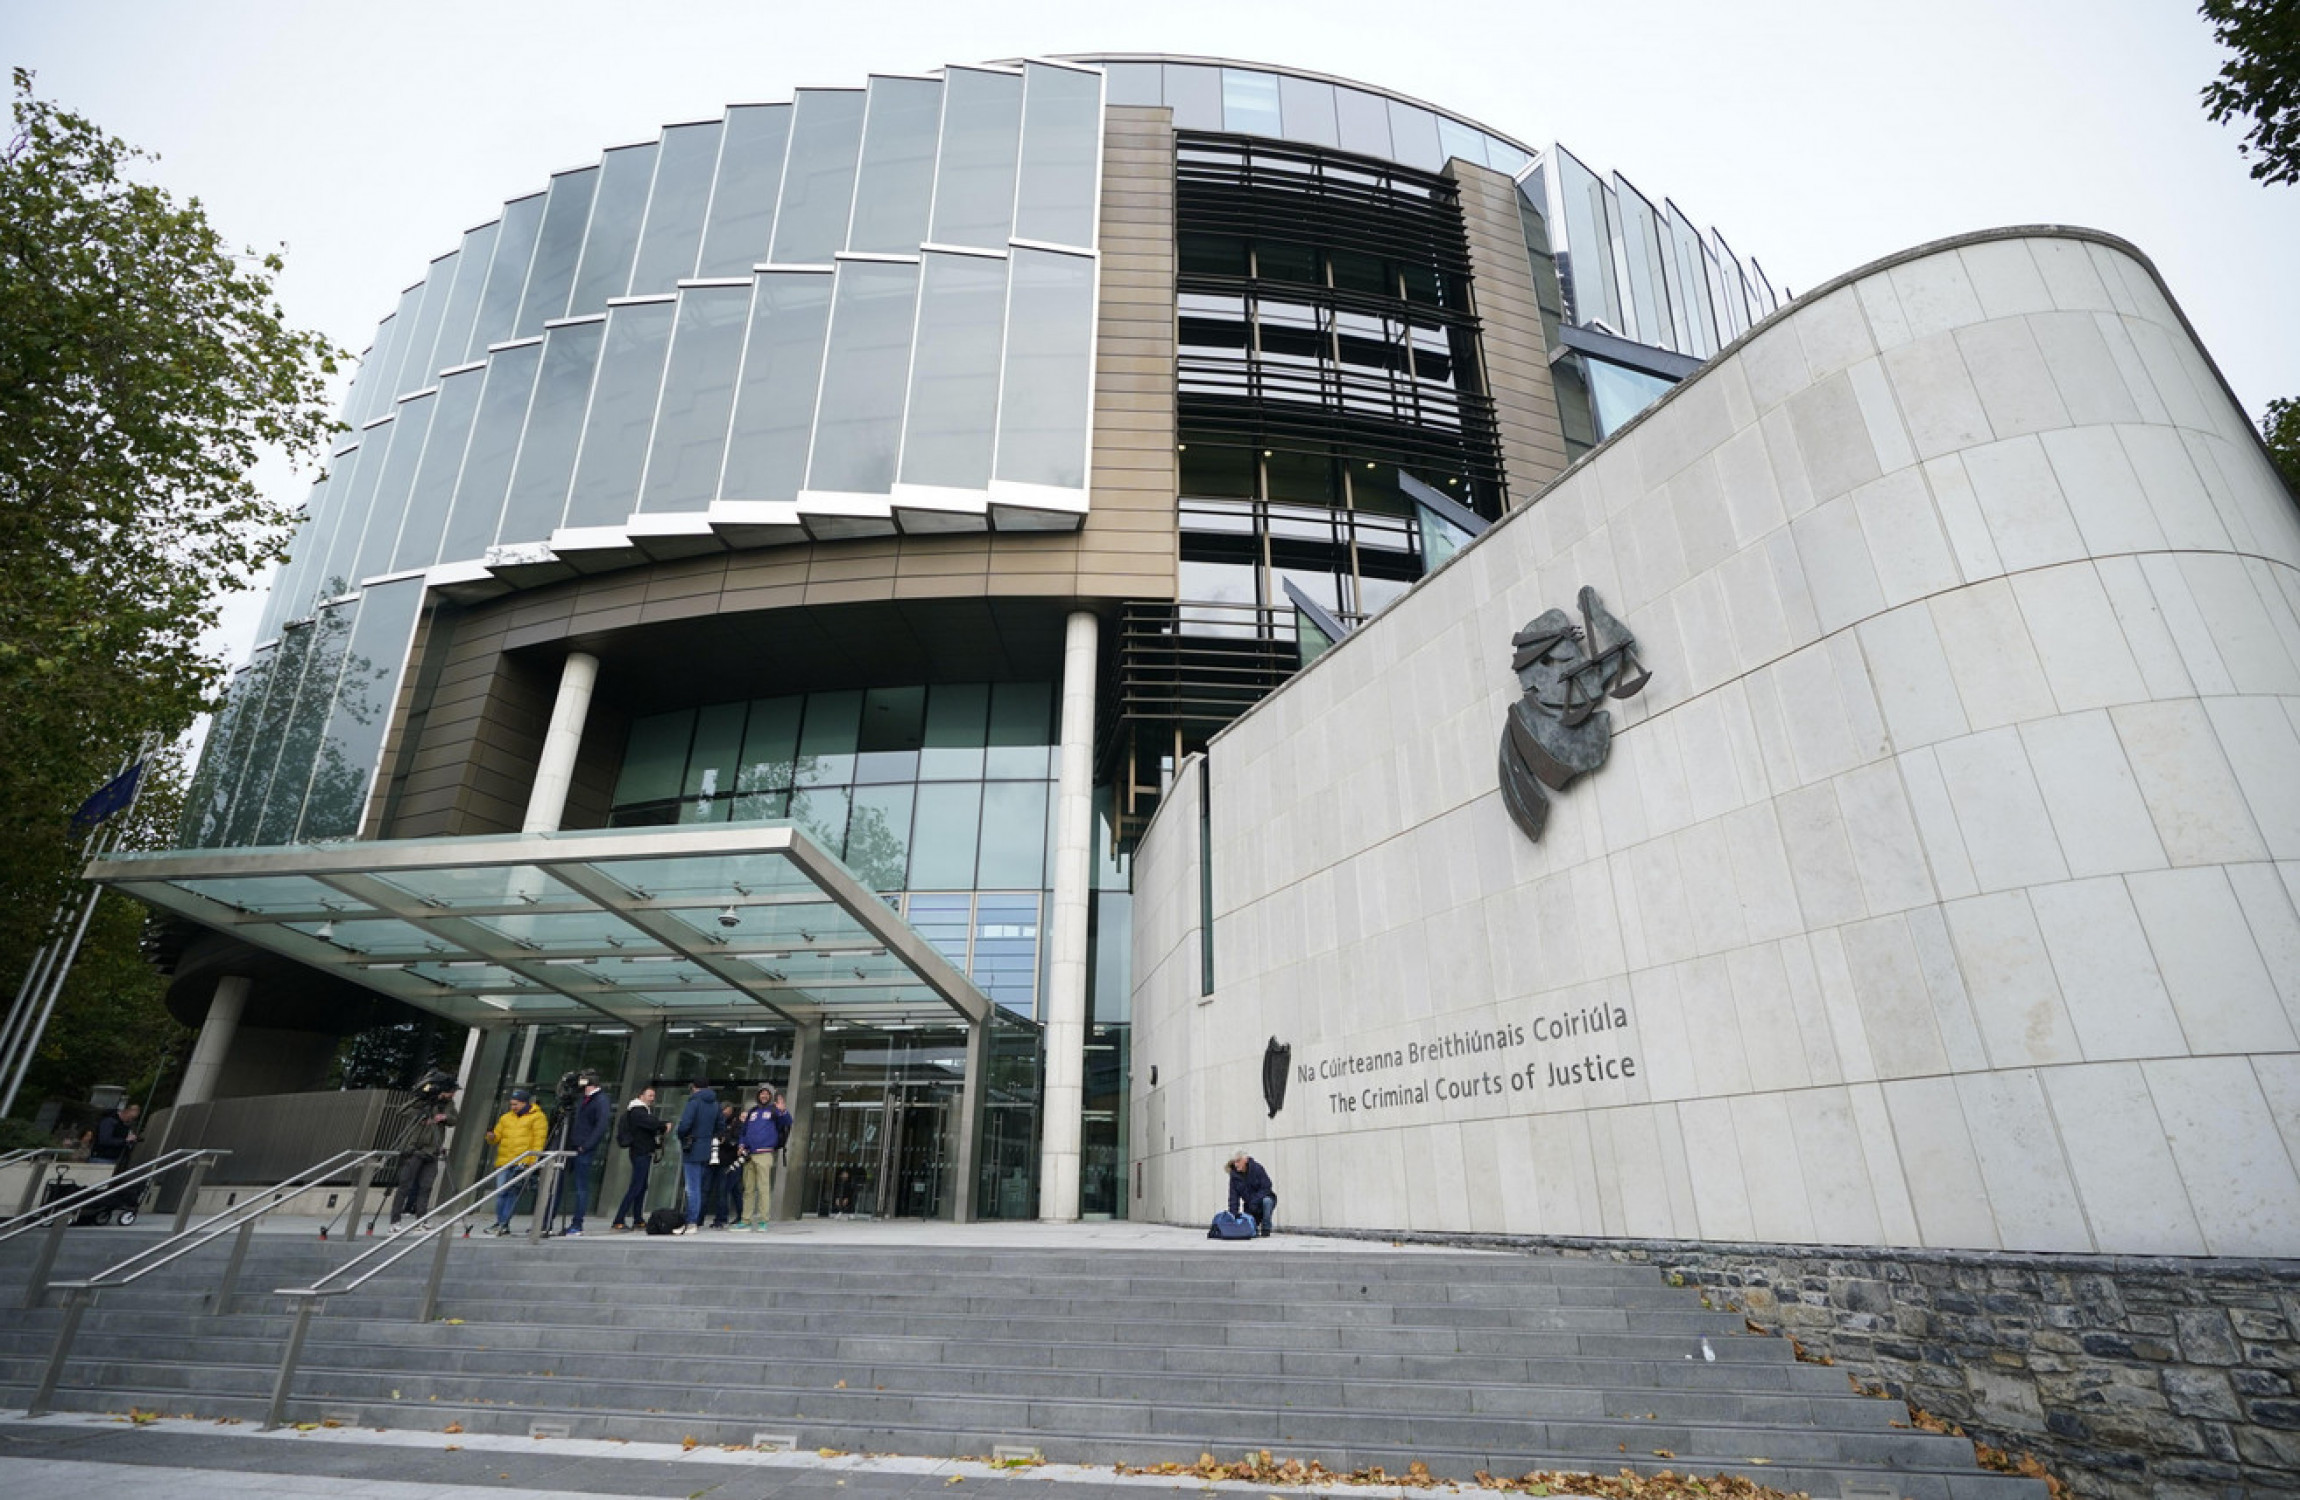 Dublin man arrested in prison 'drone drugs bust' had €180k in alleged crime proceeds, court told